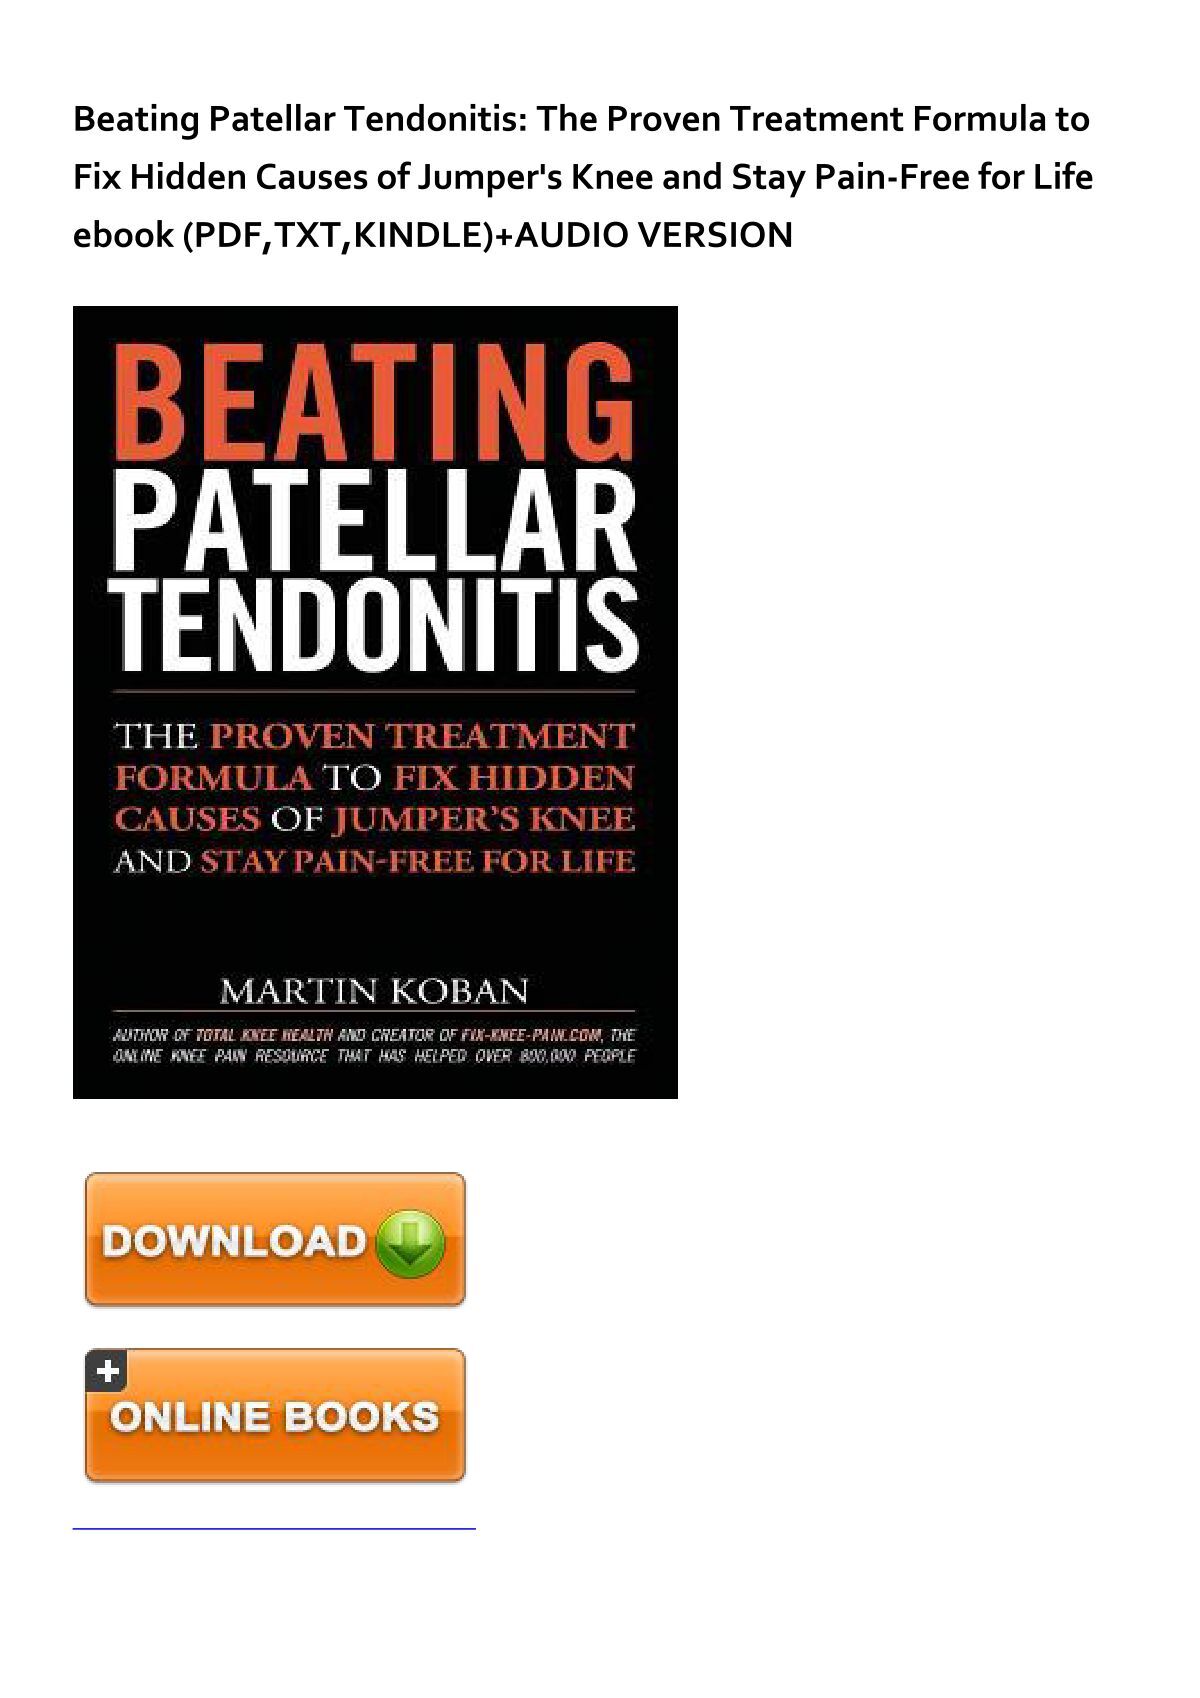 GRATEFUL) Beating Patellar Tendonitis: The Proven Treatment Formula to Fix  Hidden Causes of Jumper's Knee and Stay Pain-Free for Life eBook PDF  Download